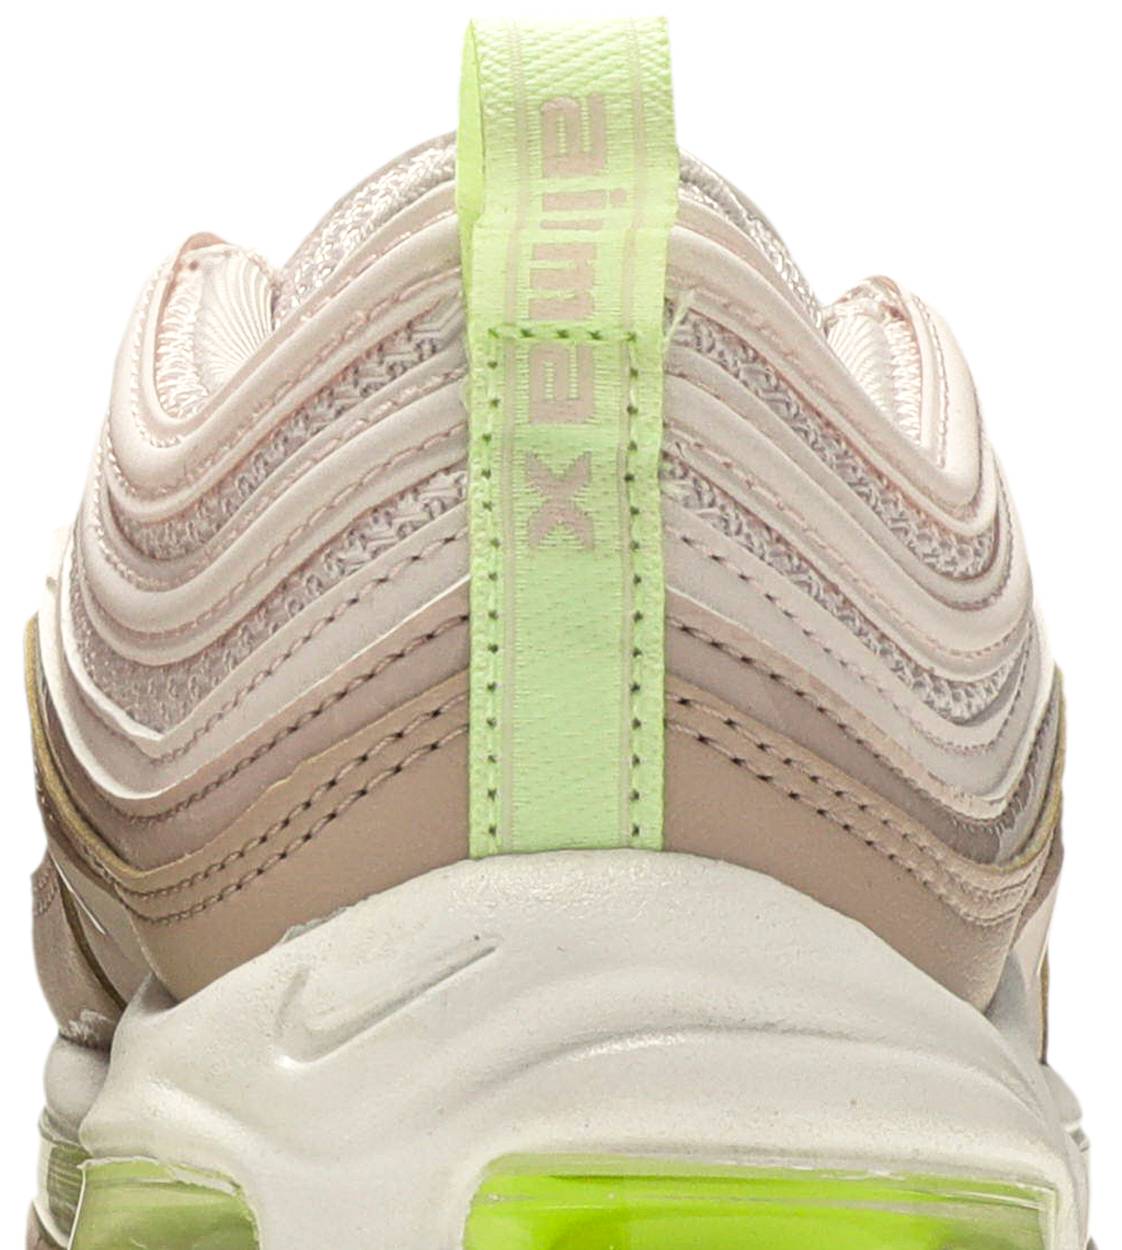 Wmns Air Max 97 'Barely Rose Volt' - Nike - CI7388 600 | GOAT